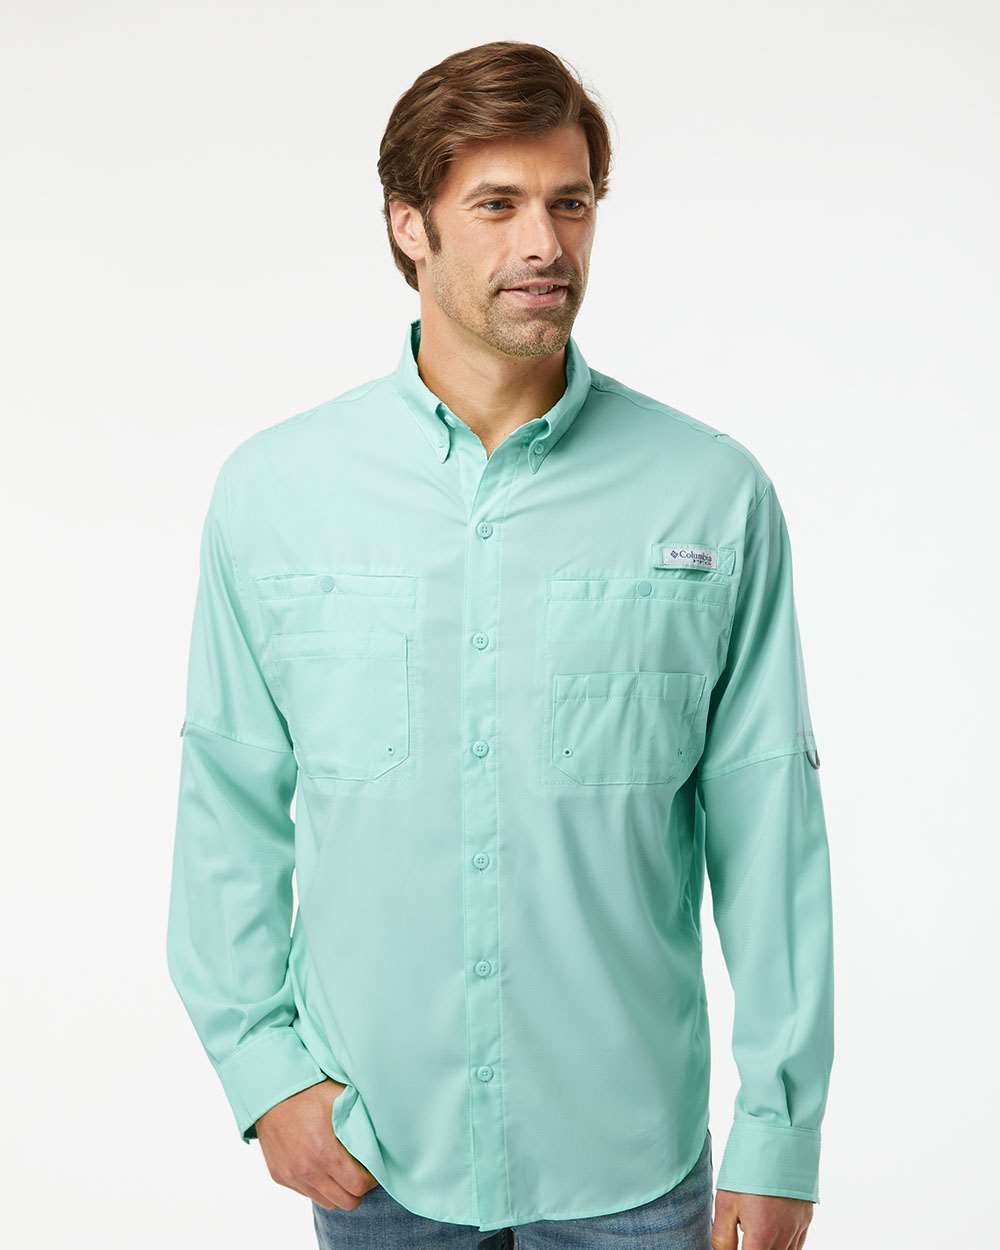 Columbia® - PFG Tamiami Long Sleeve Shirt, 2.4 oz./yd², 100% polyester  ripstop for Unbeatable Comfort and Style Long Sleeve Tee - 128606, Designed to elevate outdoor adventures to new heights